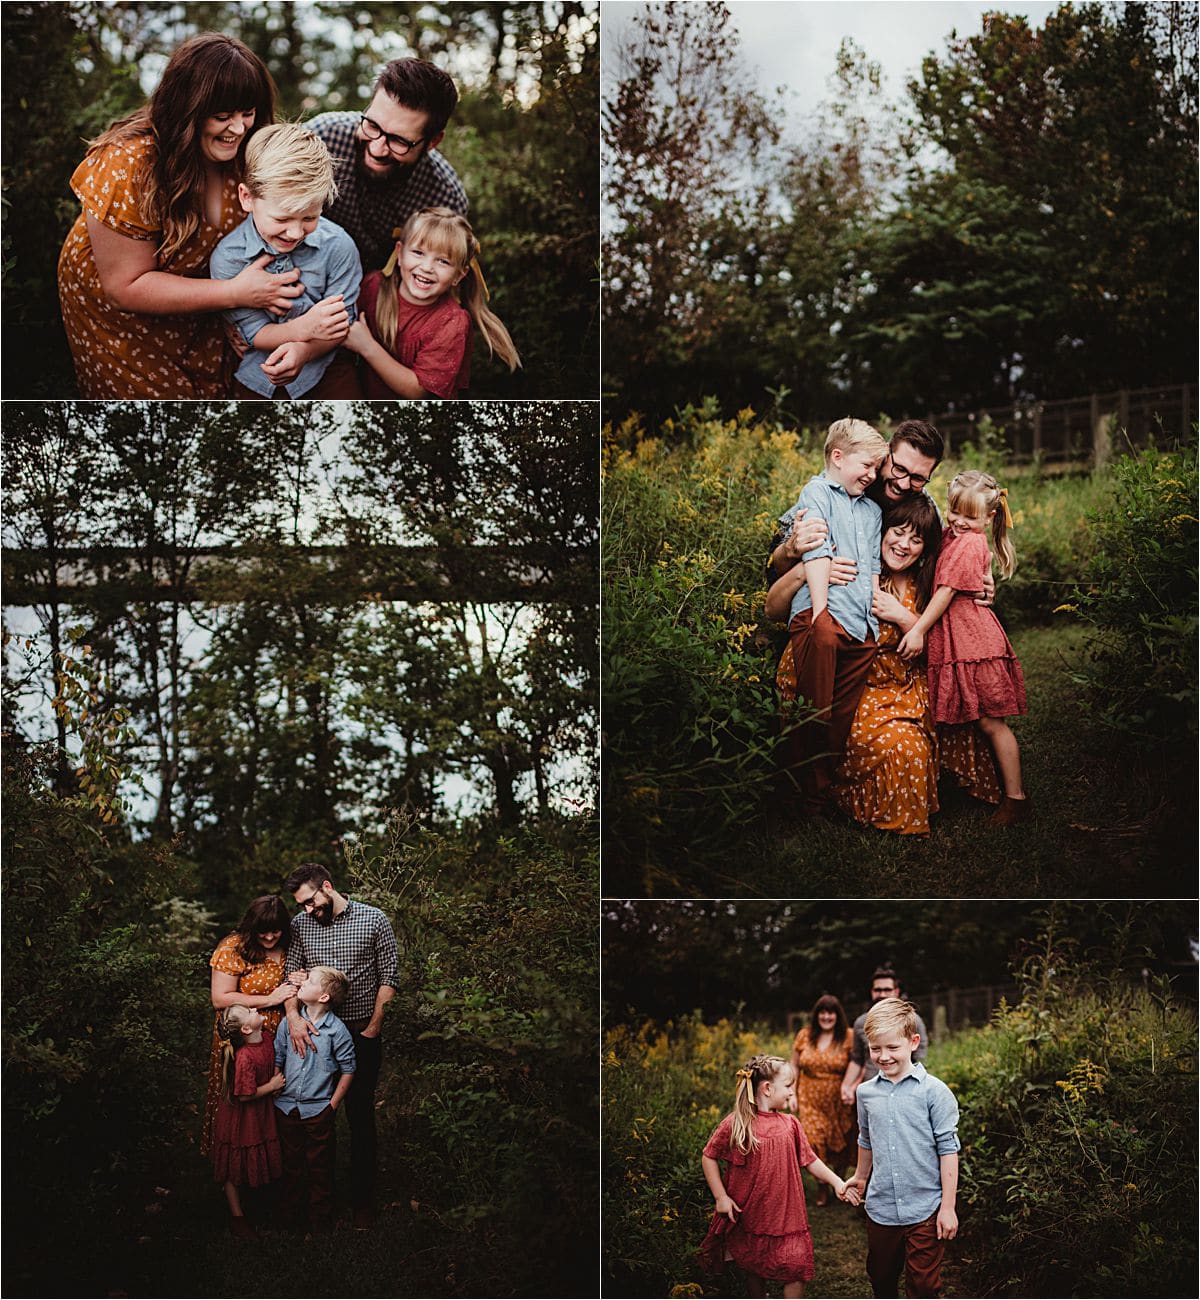 Sunset Family Session Snuggling